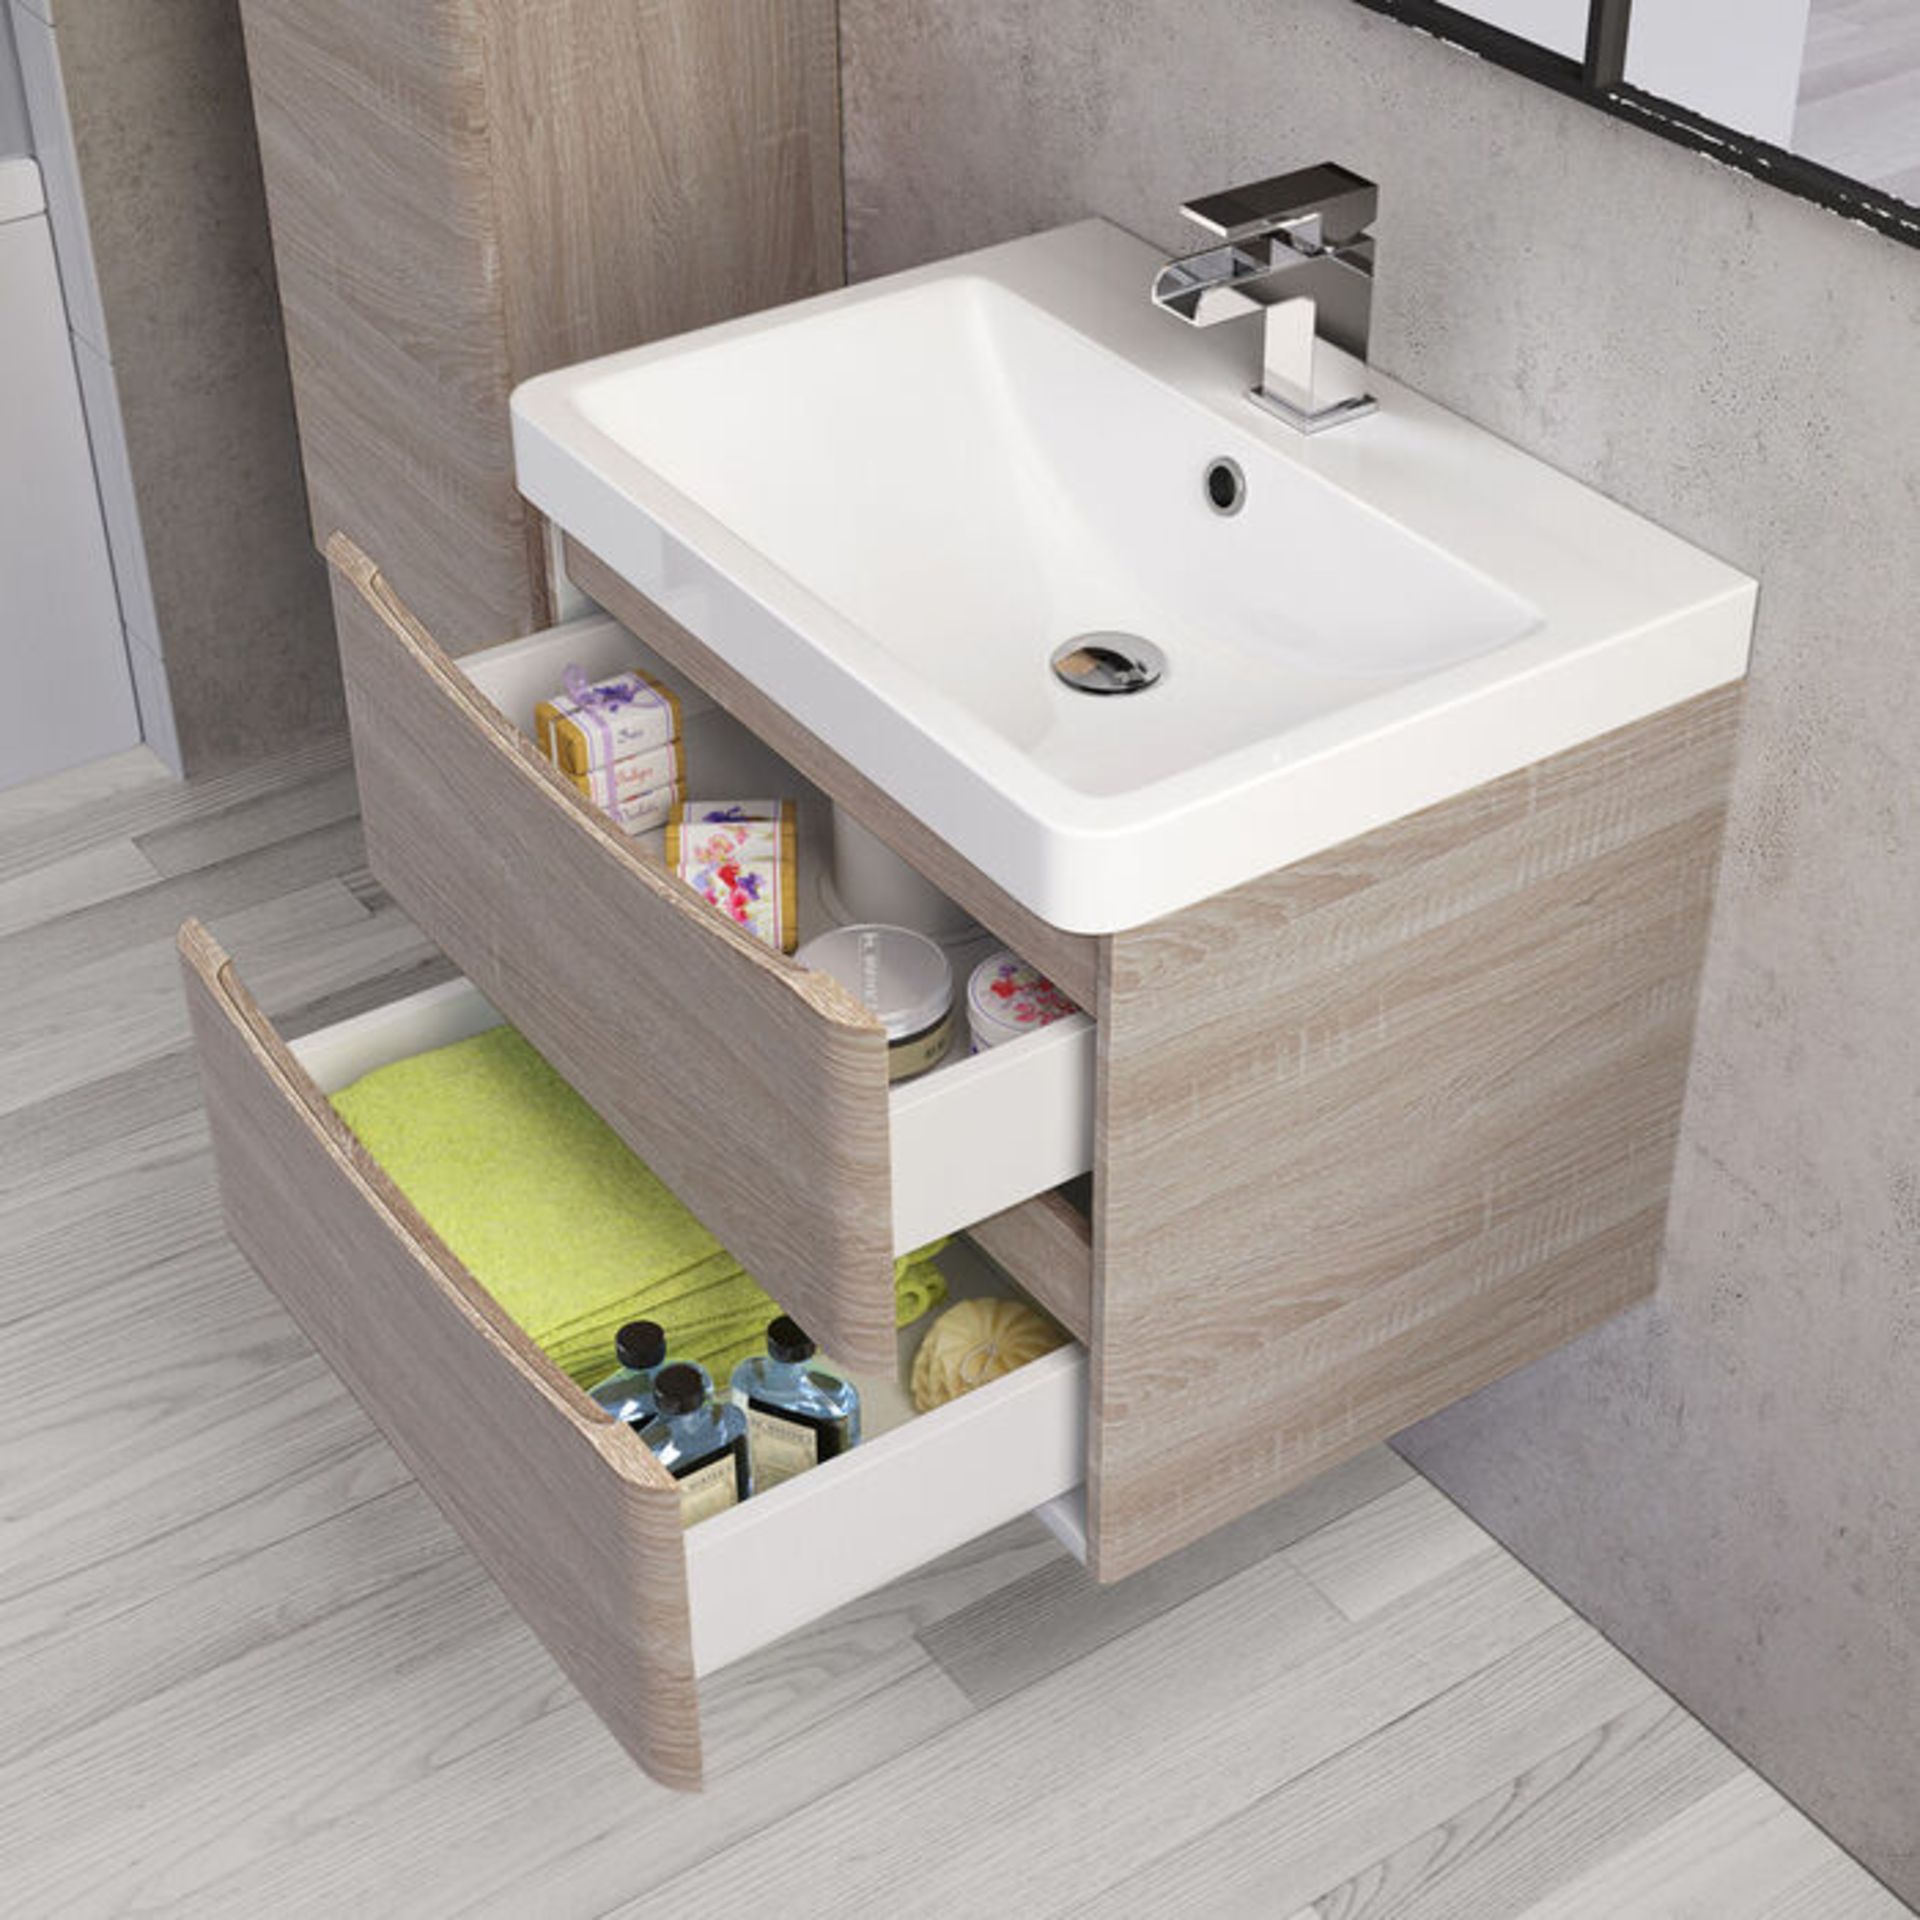 BRAND NEW BOXED 600mm Austin II Light Oak Effect Built In Sink Drawer Unit - Wall Hung.RRP £499.99. - Image 2 of 3